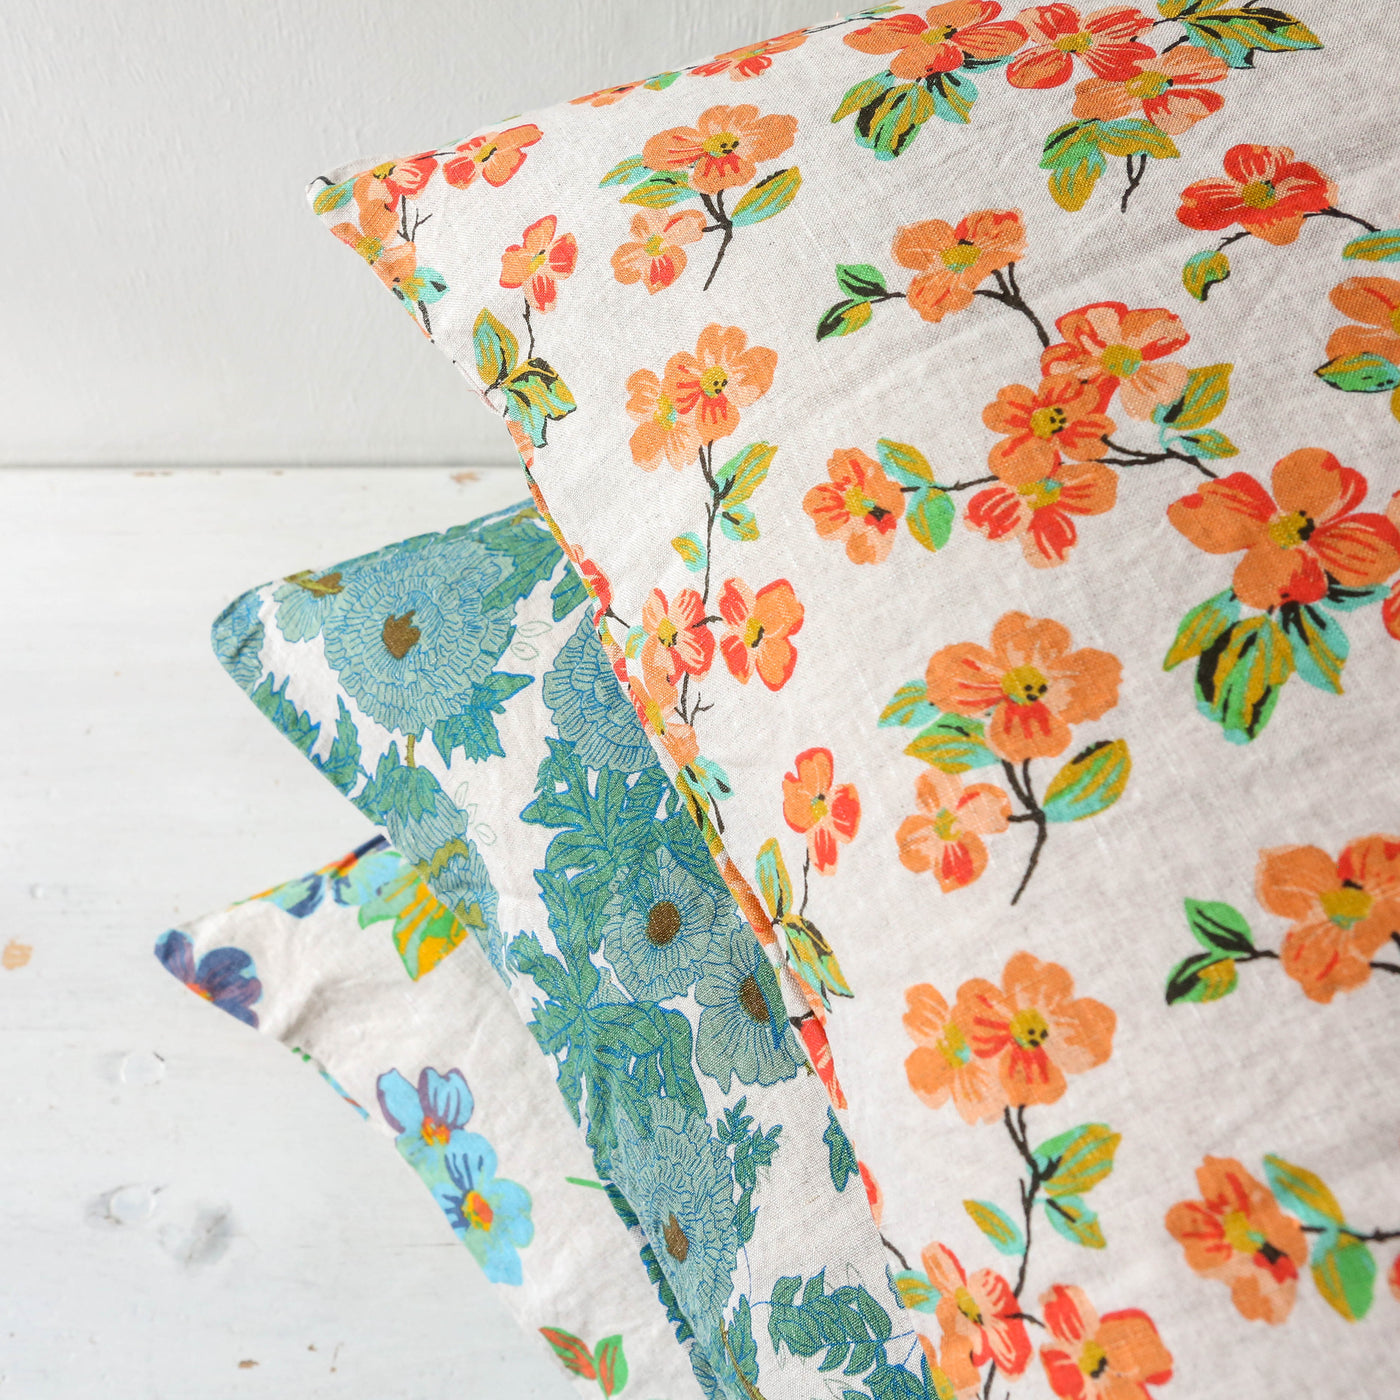 Joan's Floral Cushion Cover